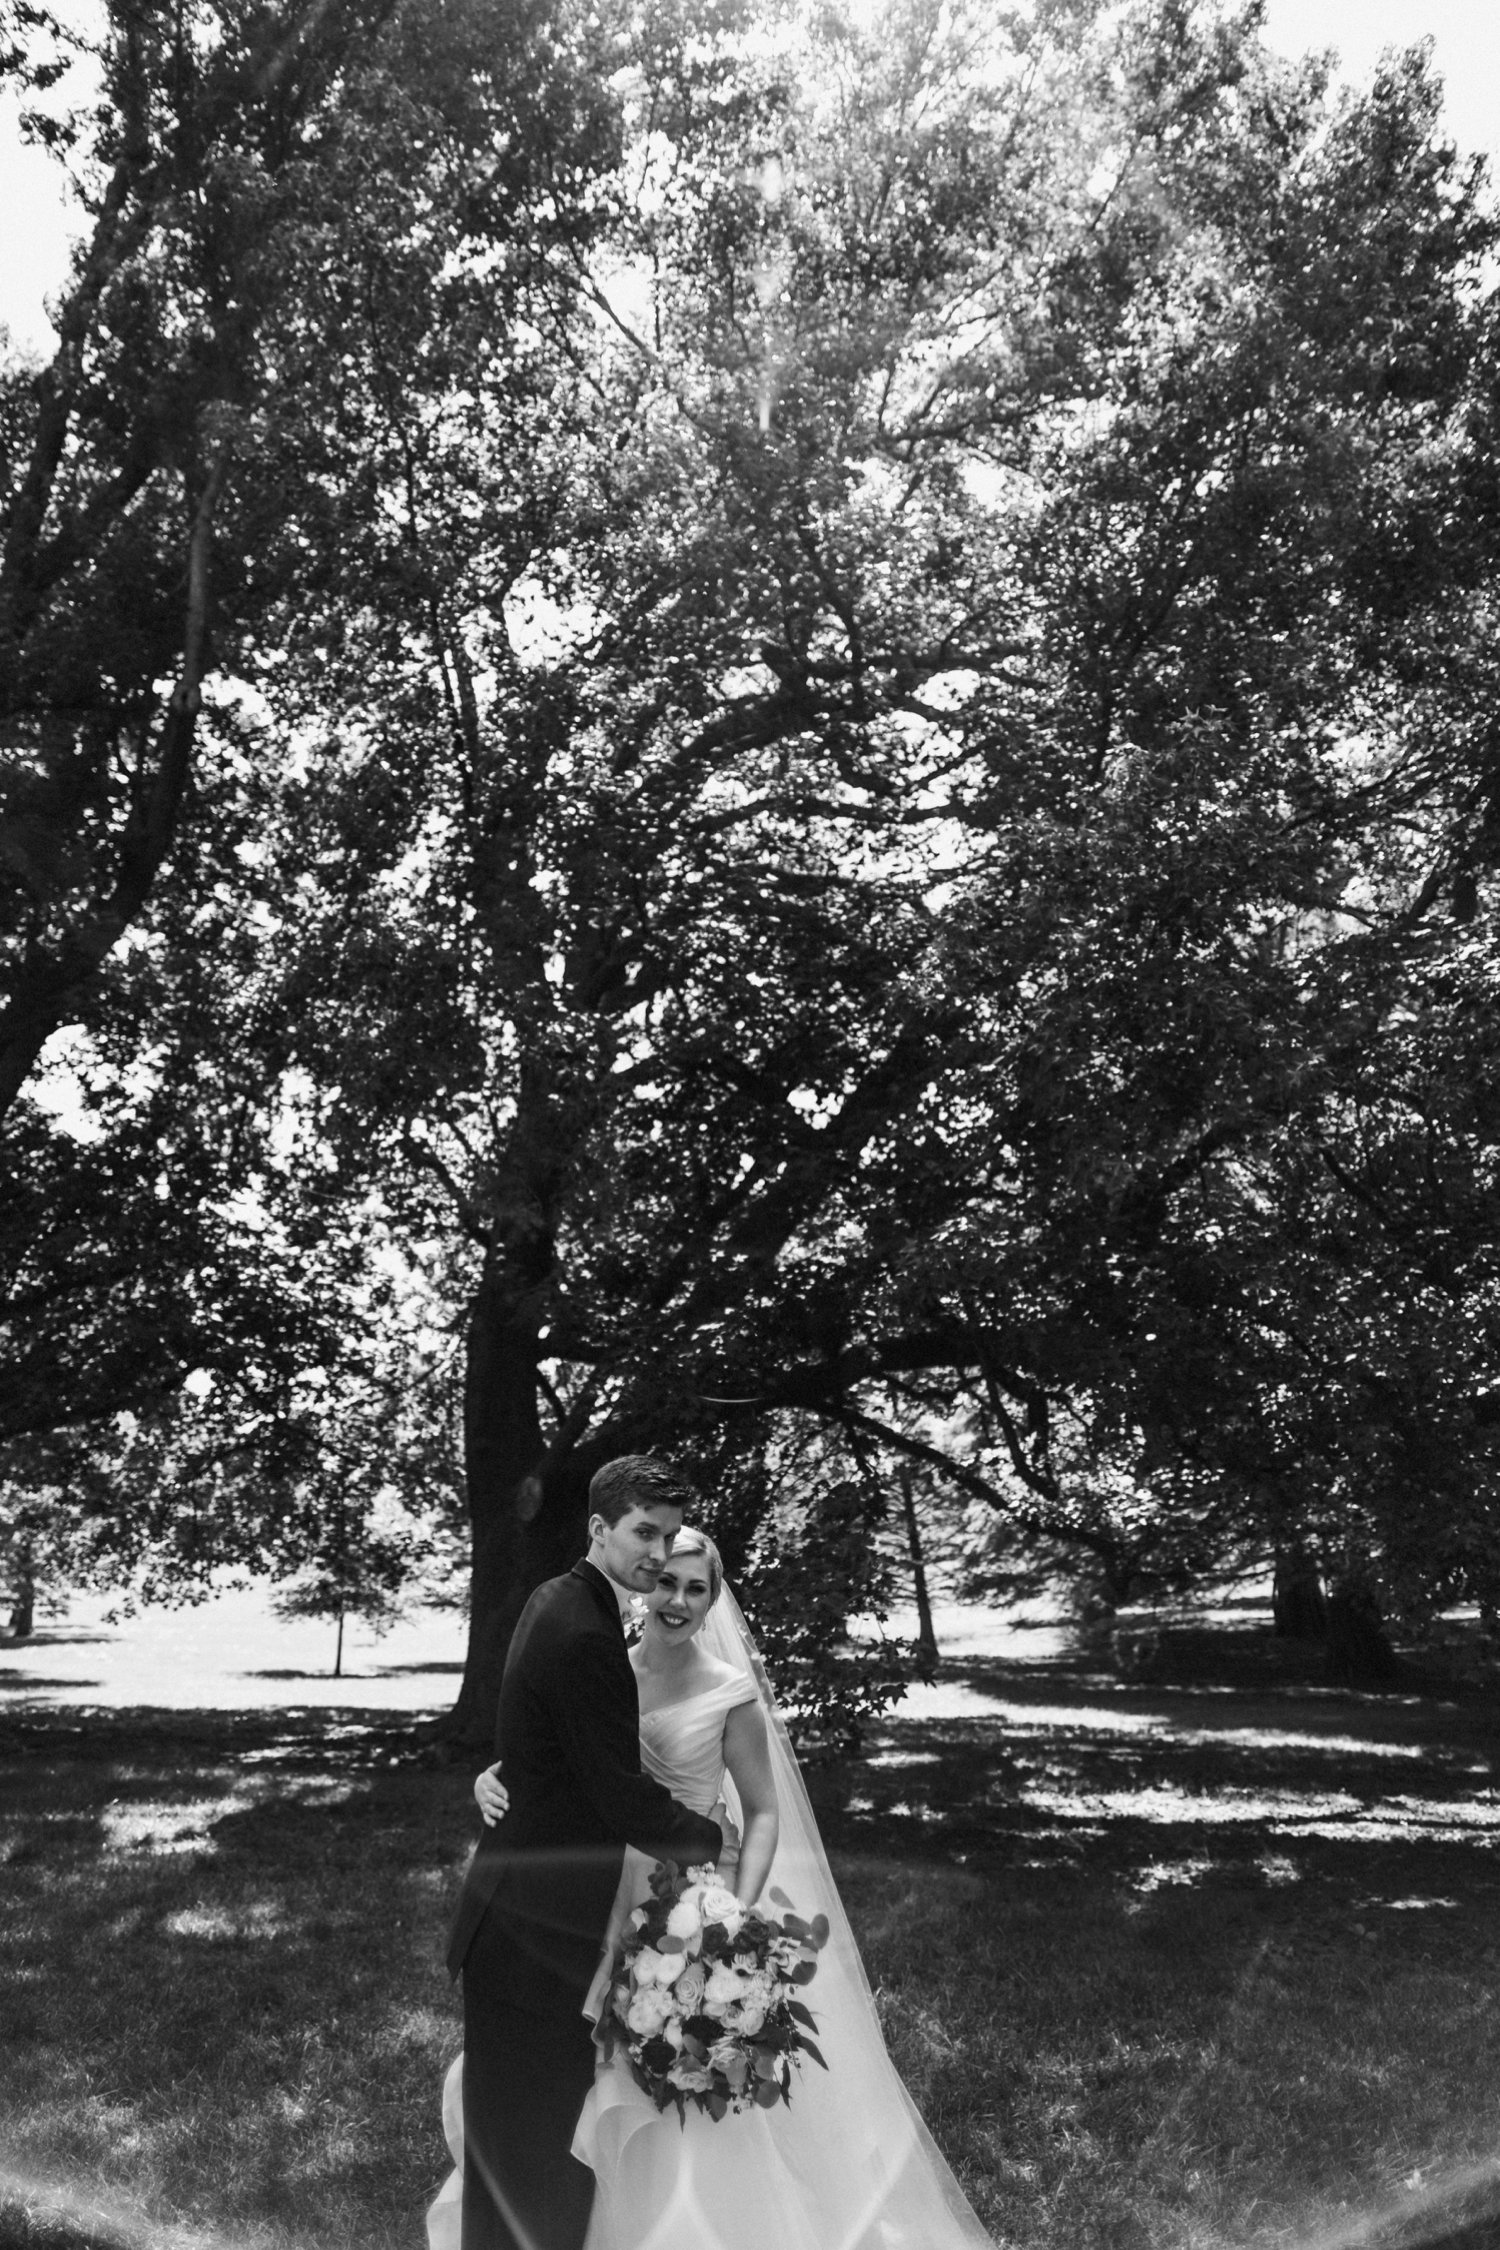  images by feliciathephotographer.com | destination wedding photographer | kansas city | summertime | classic | couple portrait | black and white | bride and groom | loose park | oak trees | mens warehouse | gown gallery | wild hill | 